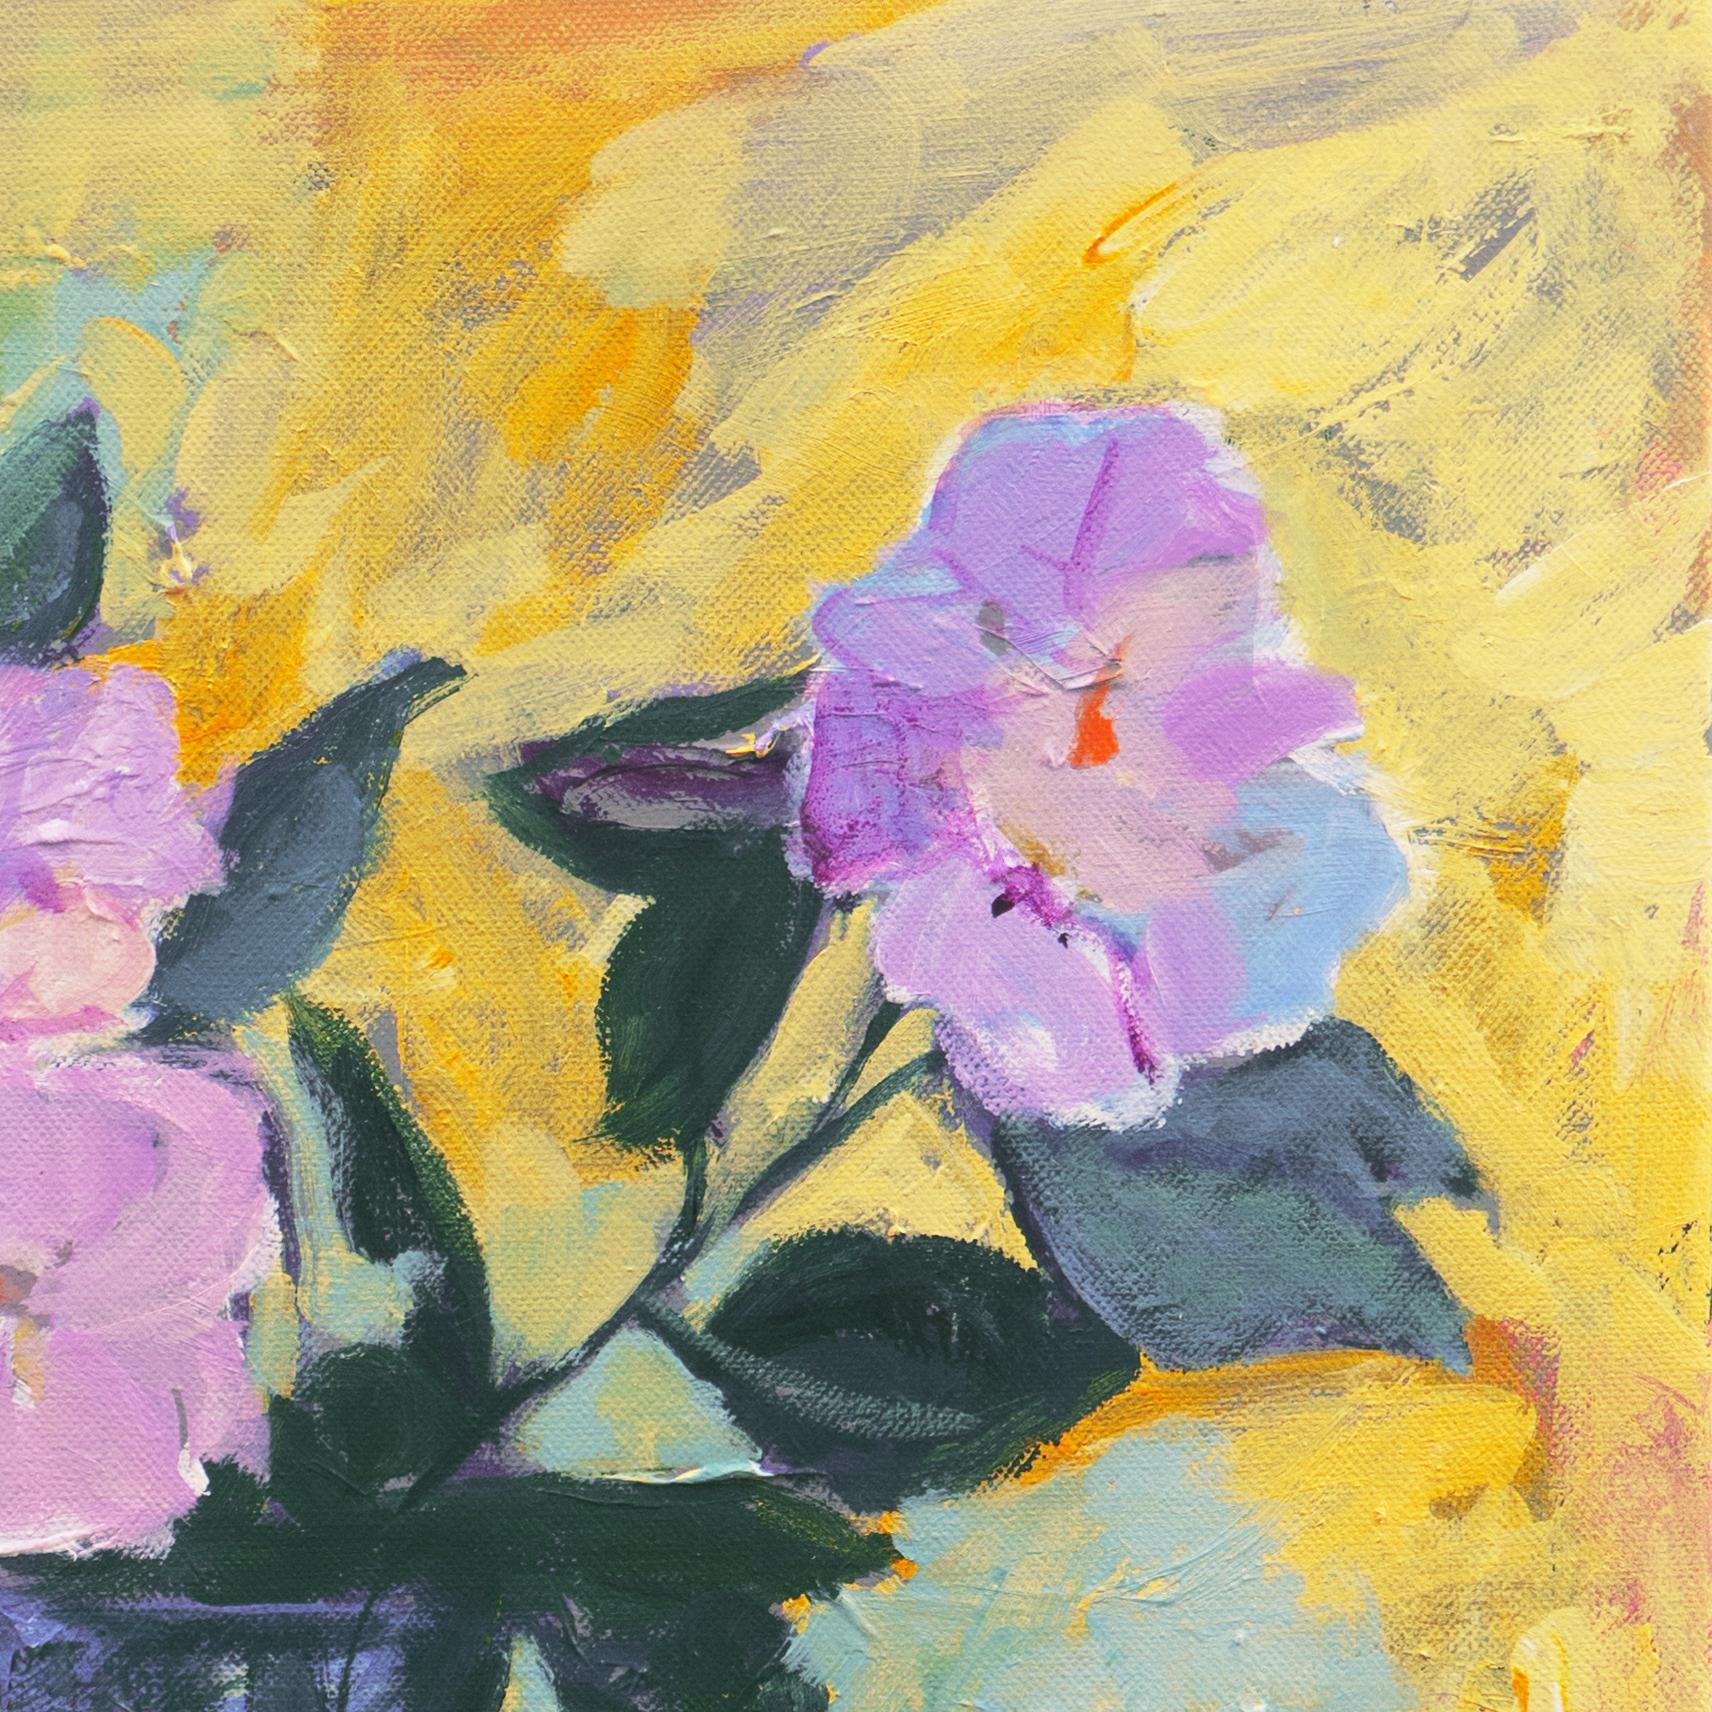 'Still Life of Morning Glory', California Woman Artist, Santa Cruz Art Guild - Post-Impressionist Painting by Cathy Puccinelli